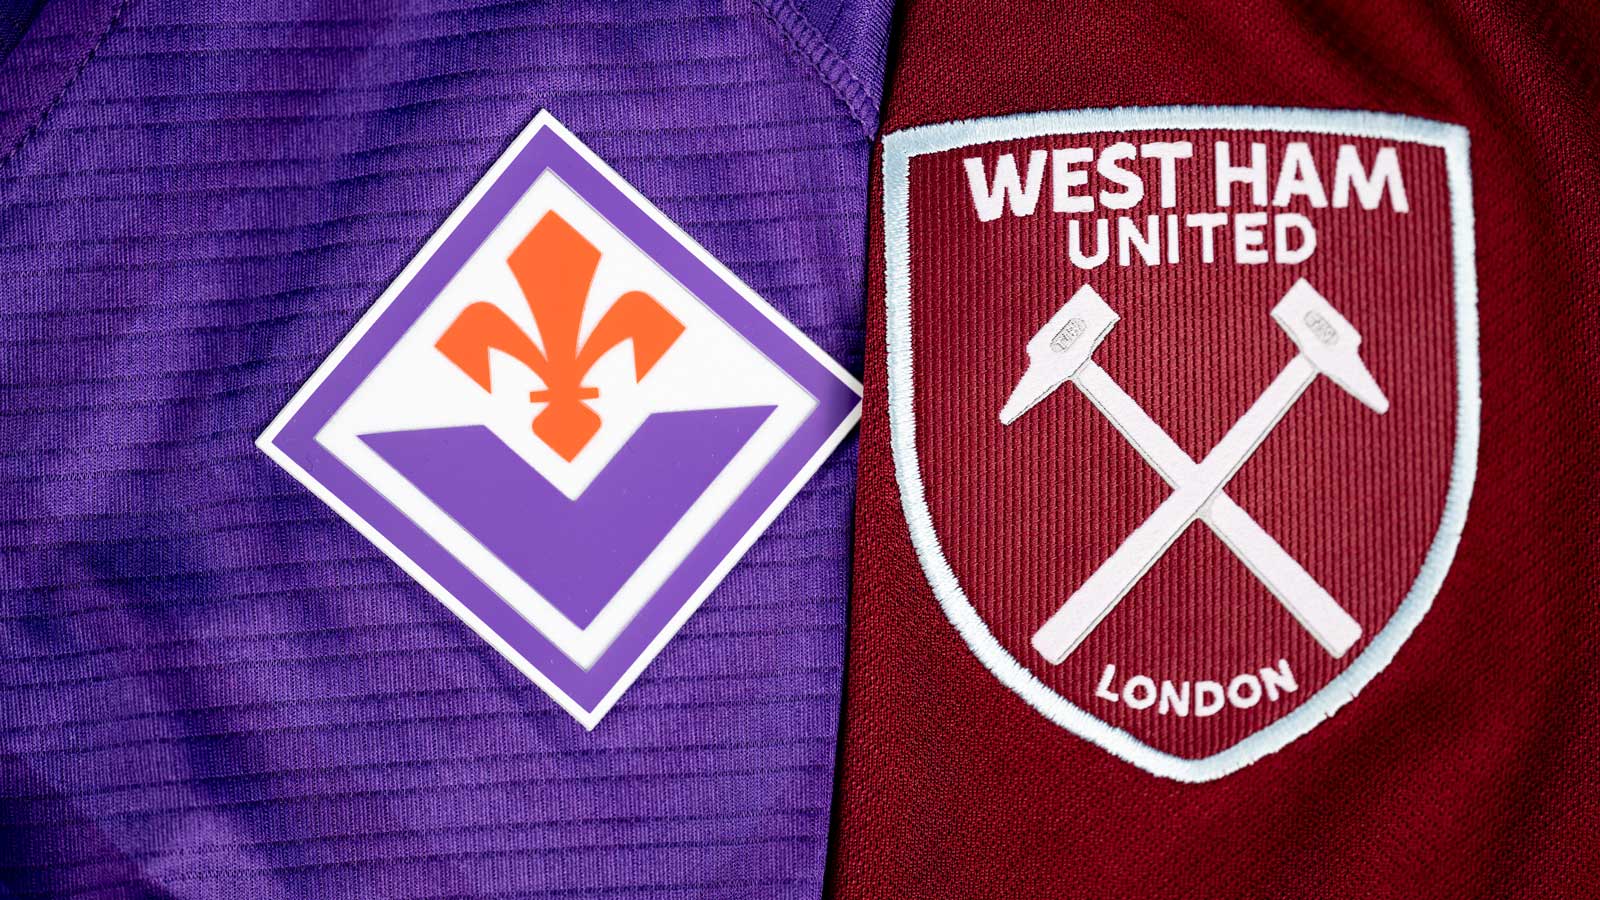 Fiorentina and West Ham United shirts side by side